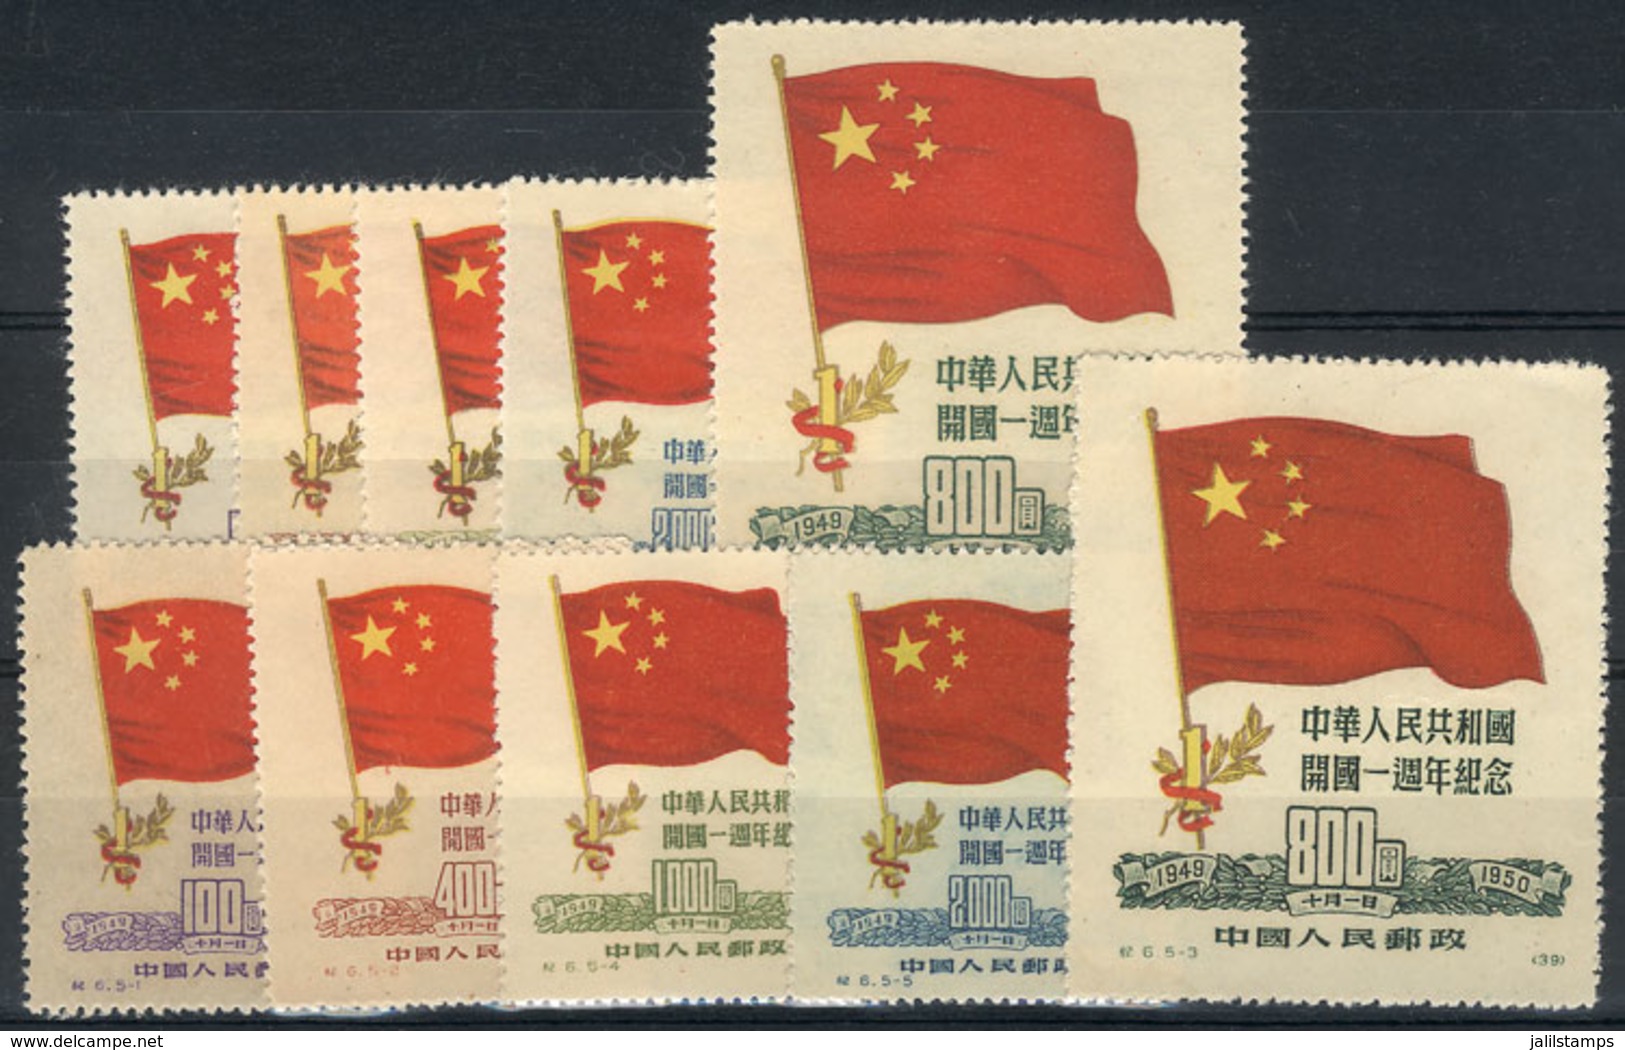 CHINA: Sc.60/64, 1950 Flags, Cmpl. Set Of 5 Values, ORIGINAL Set, MNH (issued Without Gum), VF Quality, Catalog Value US - Gebruikt